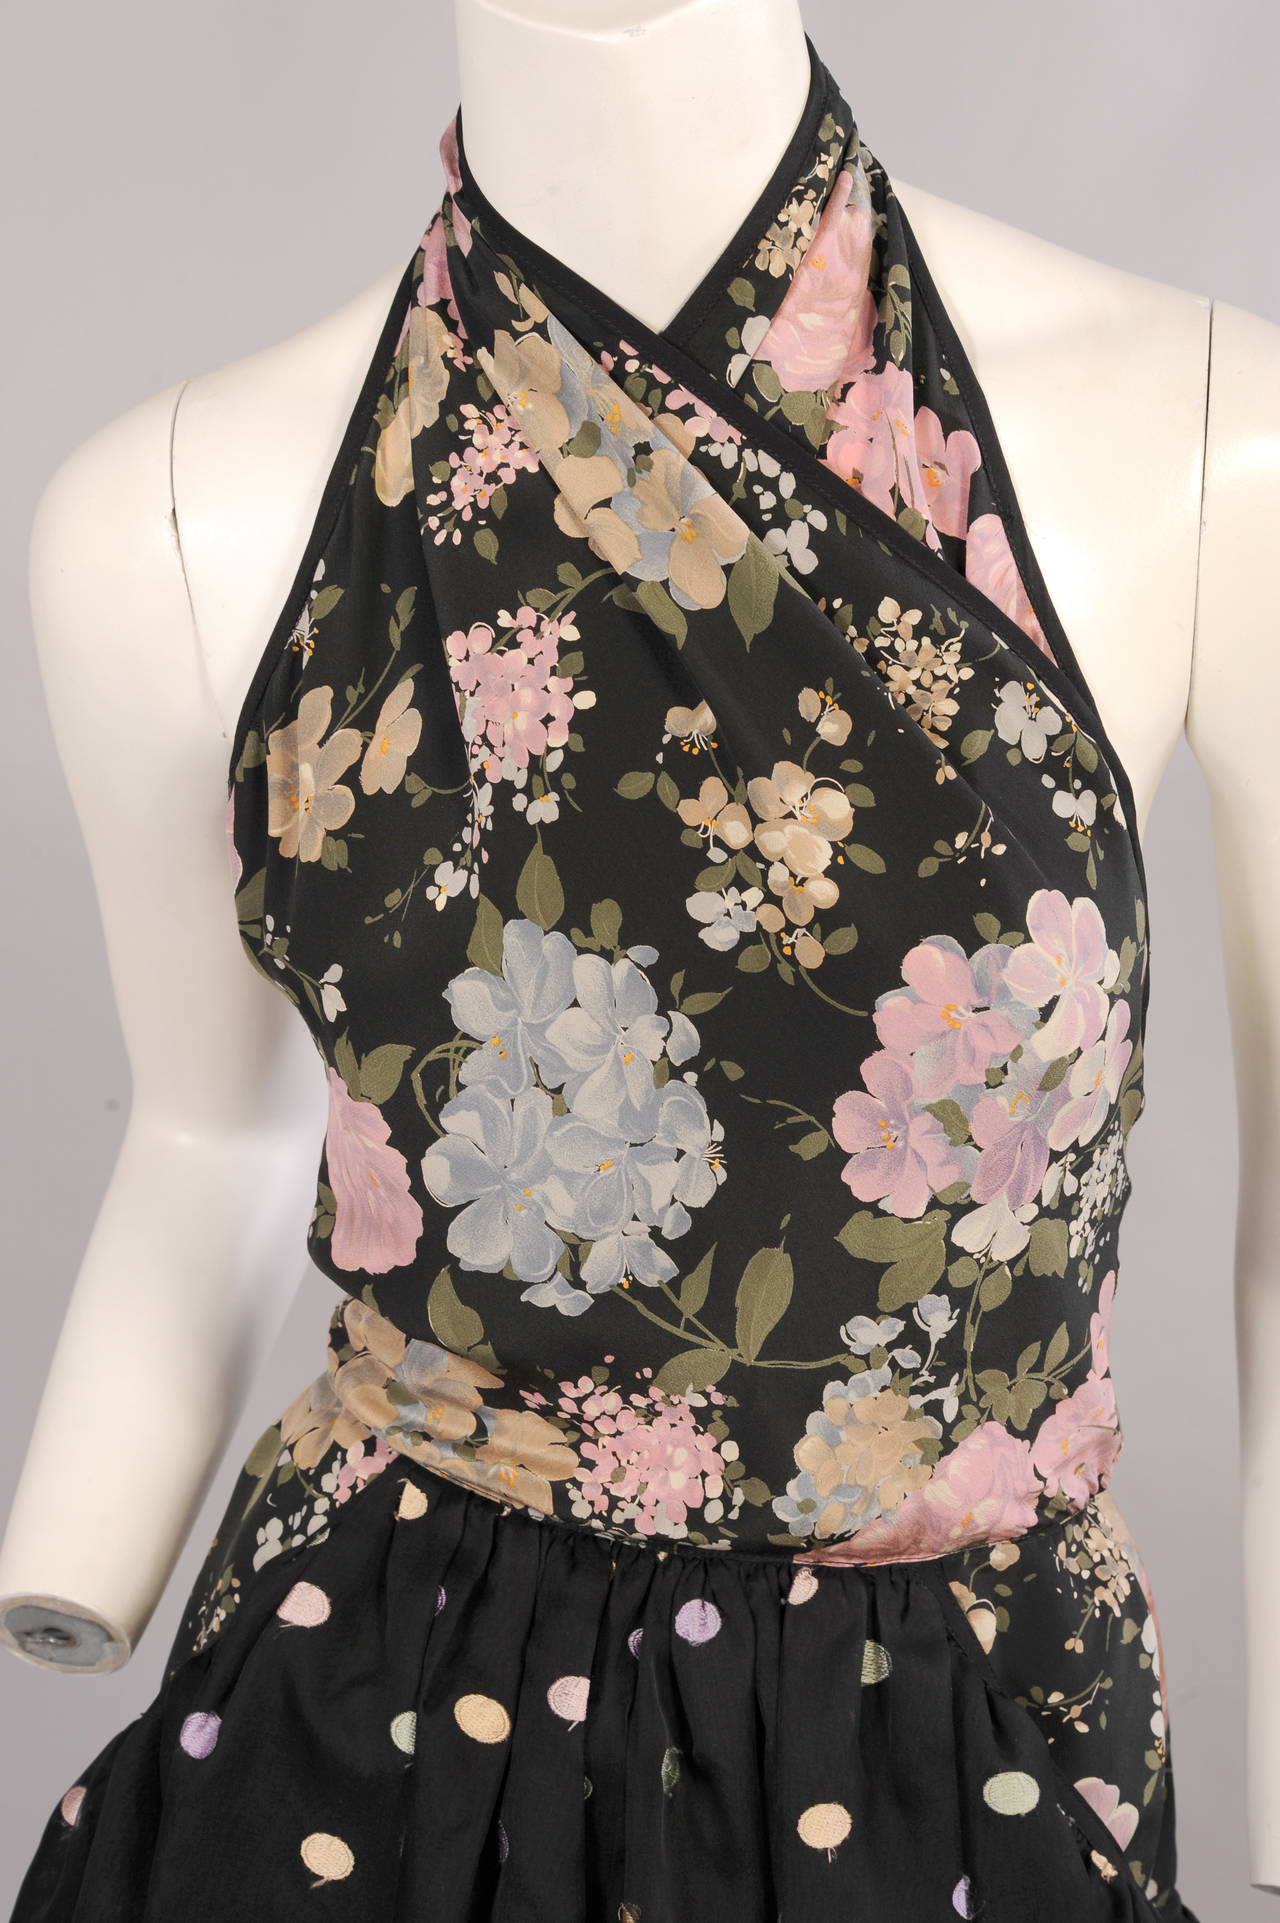 Pastel flowers on a black background are combined with pastel embroidered polka dots on a sheer silk skirt. This is edged with scalloped polka dot tulle to create a very feminine dress from Geoffrey Beene. The floral print extends below the waist 